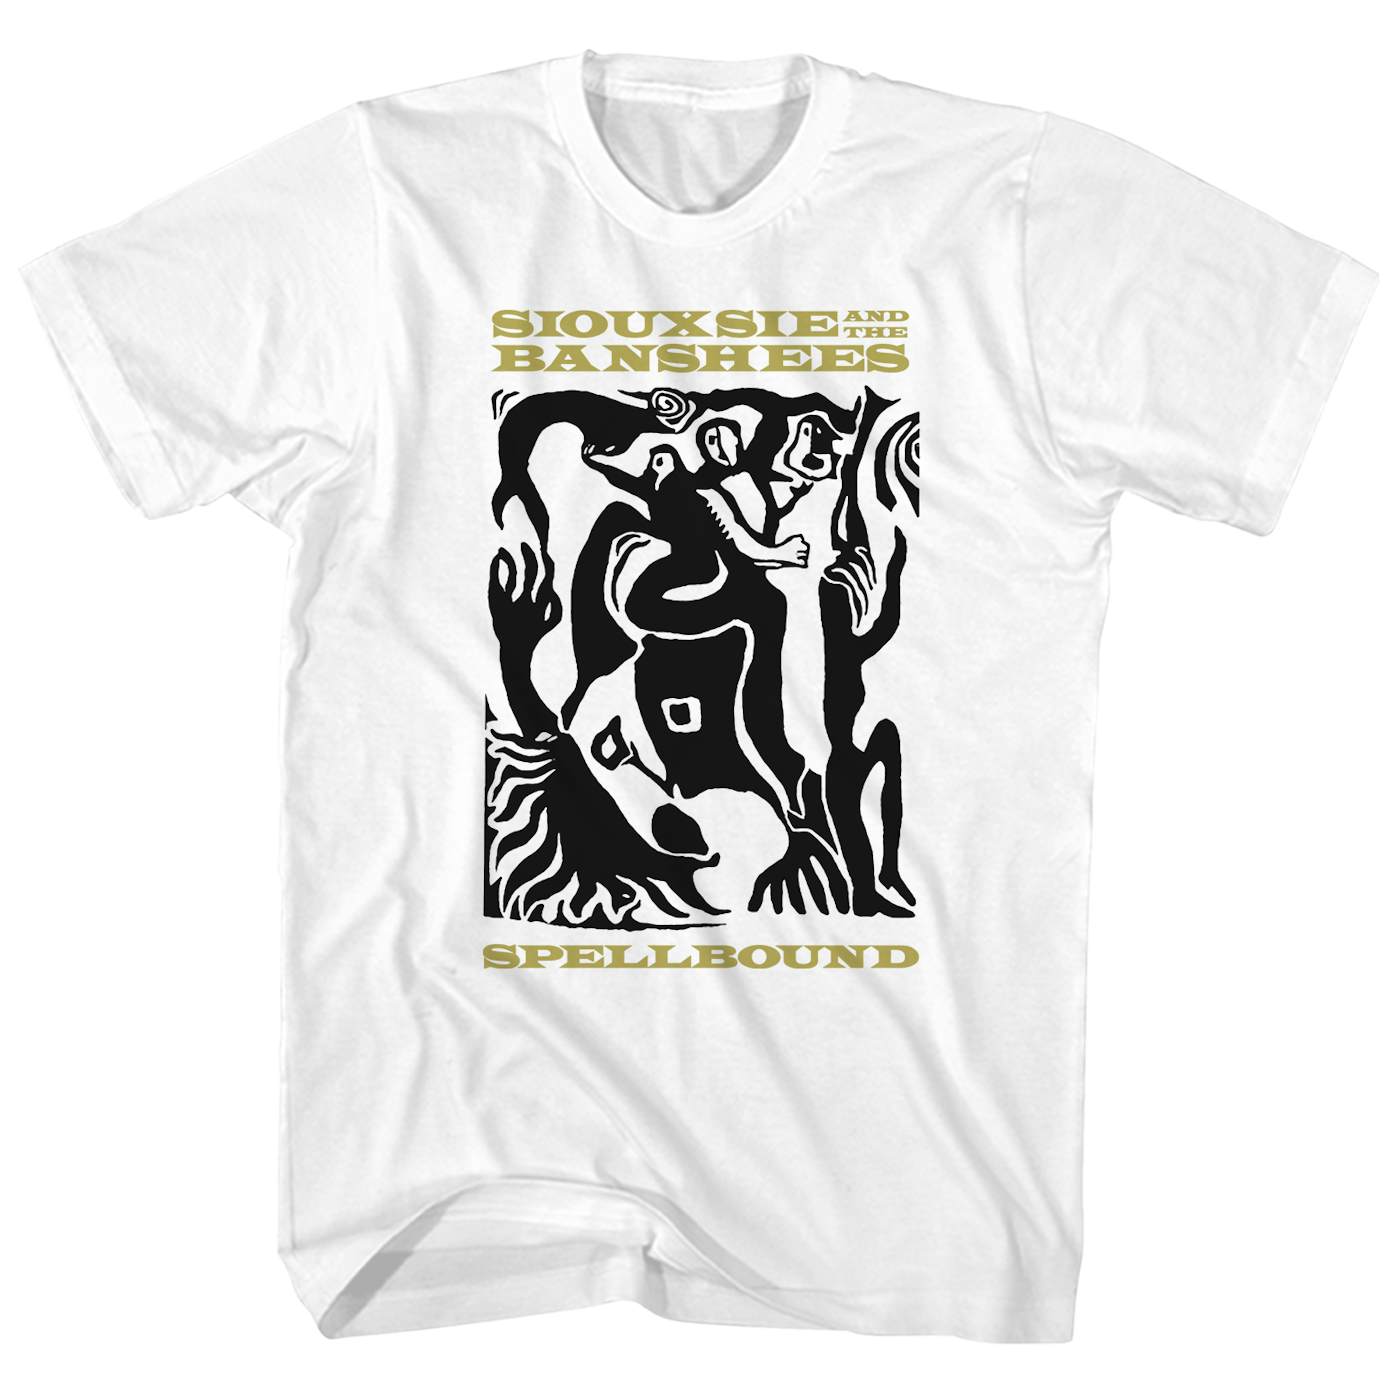 Siouxsie And The Banshees T-Shirt | Spellbound Siouxsie And The Banshees Shirt